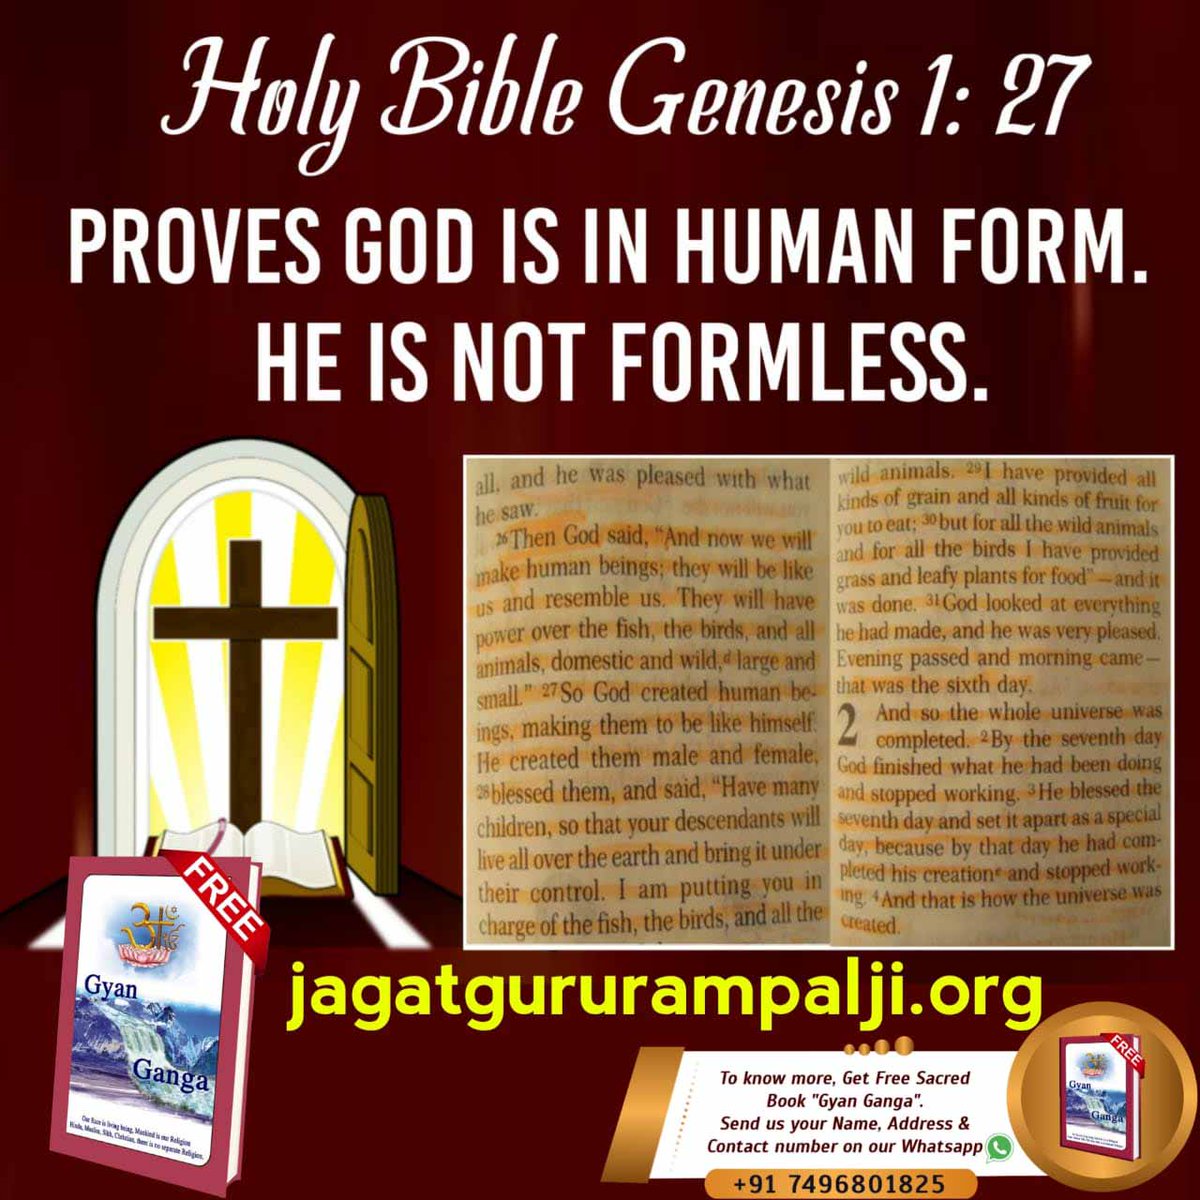 #TruthAboutTheDeathOfJesus
It is written in the Holy Bible that after leaving the body of Jesus, another Messiah will come into the world who will establish peace in the world.
He is none other than Jagatguru Tattvarshi Sant Rampal Ji Maharaj Ji. --